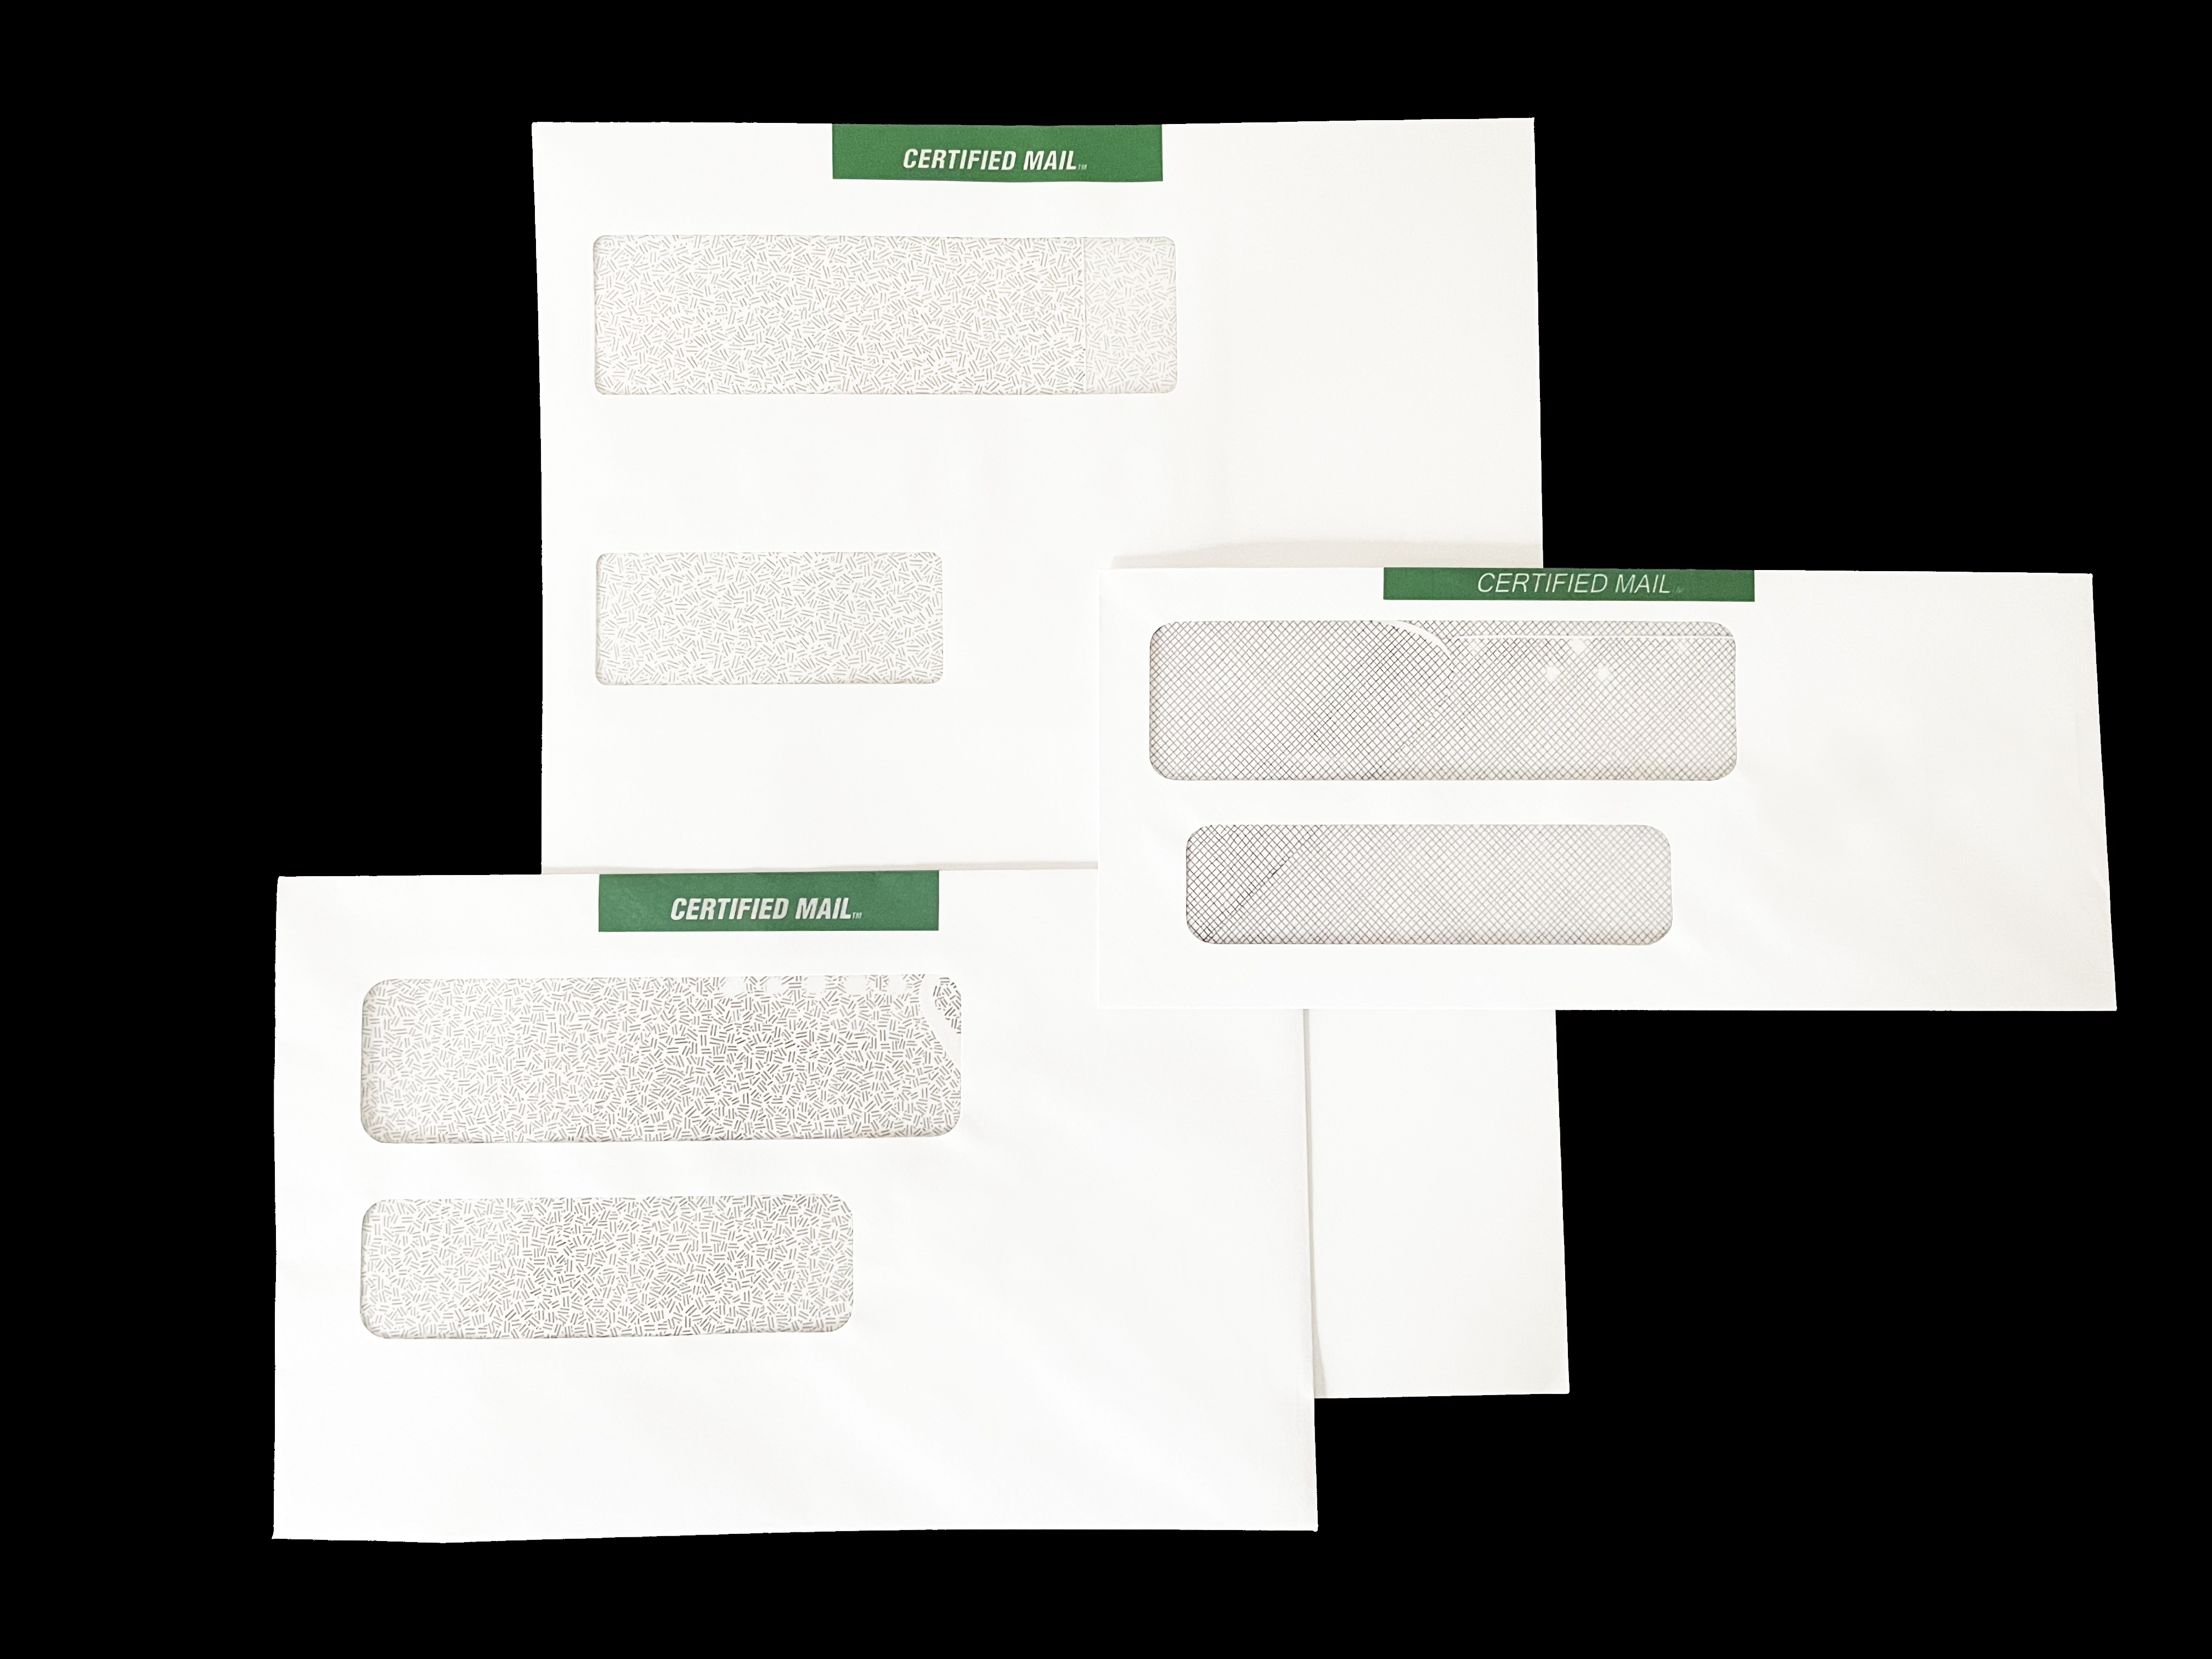 Certified Mail envelopes